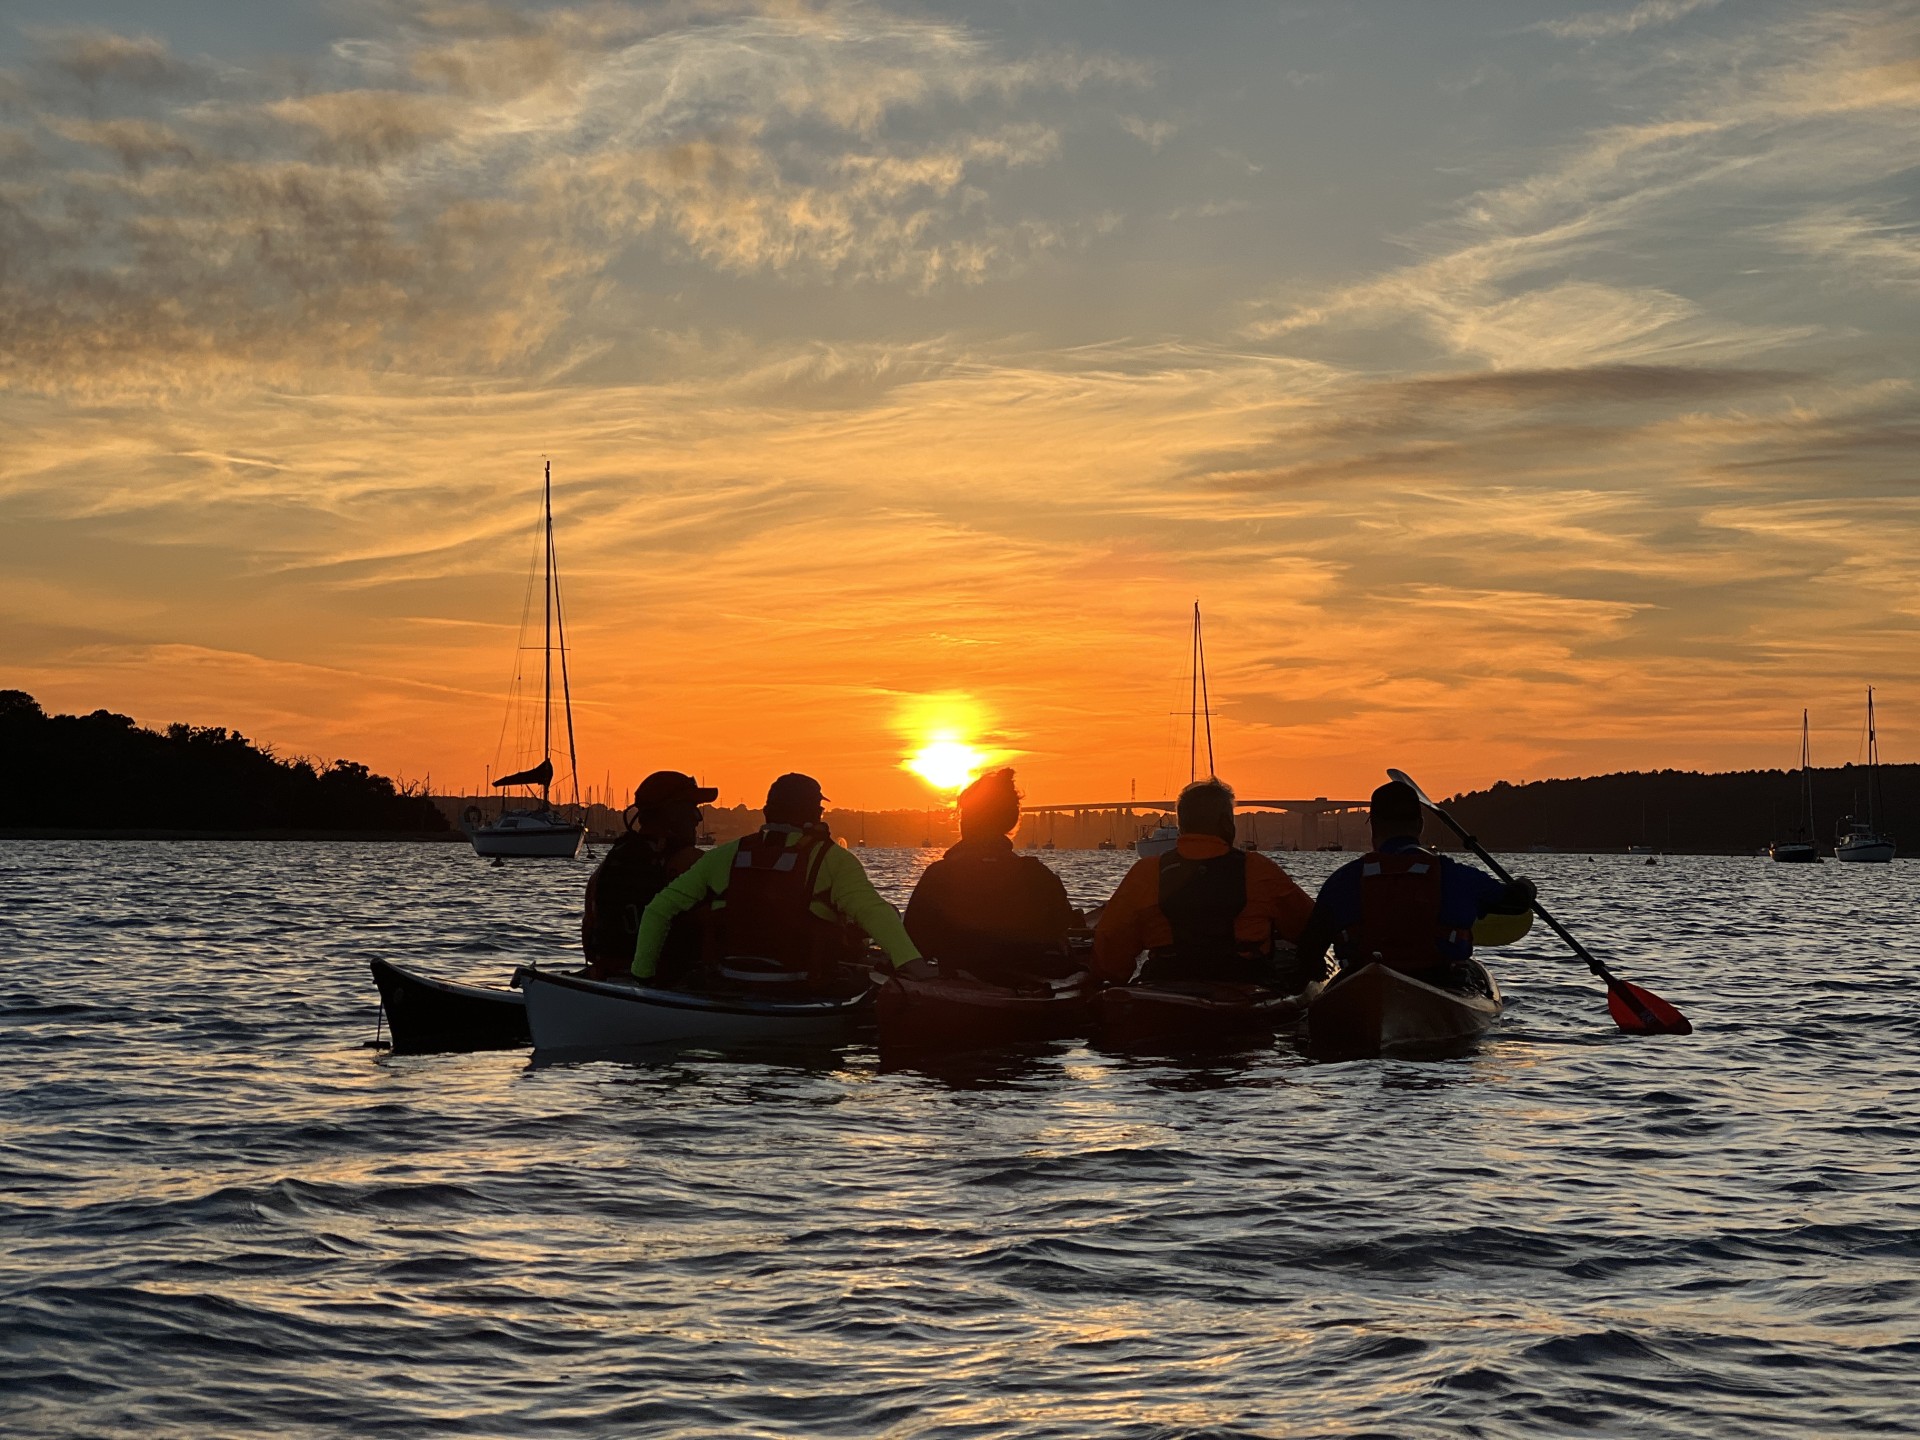 Rafted sea kayakers with a Suffolk sunset.